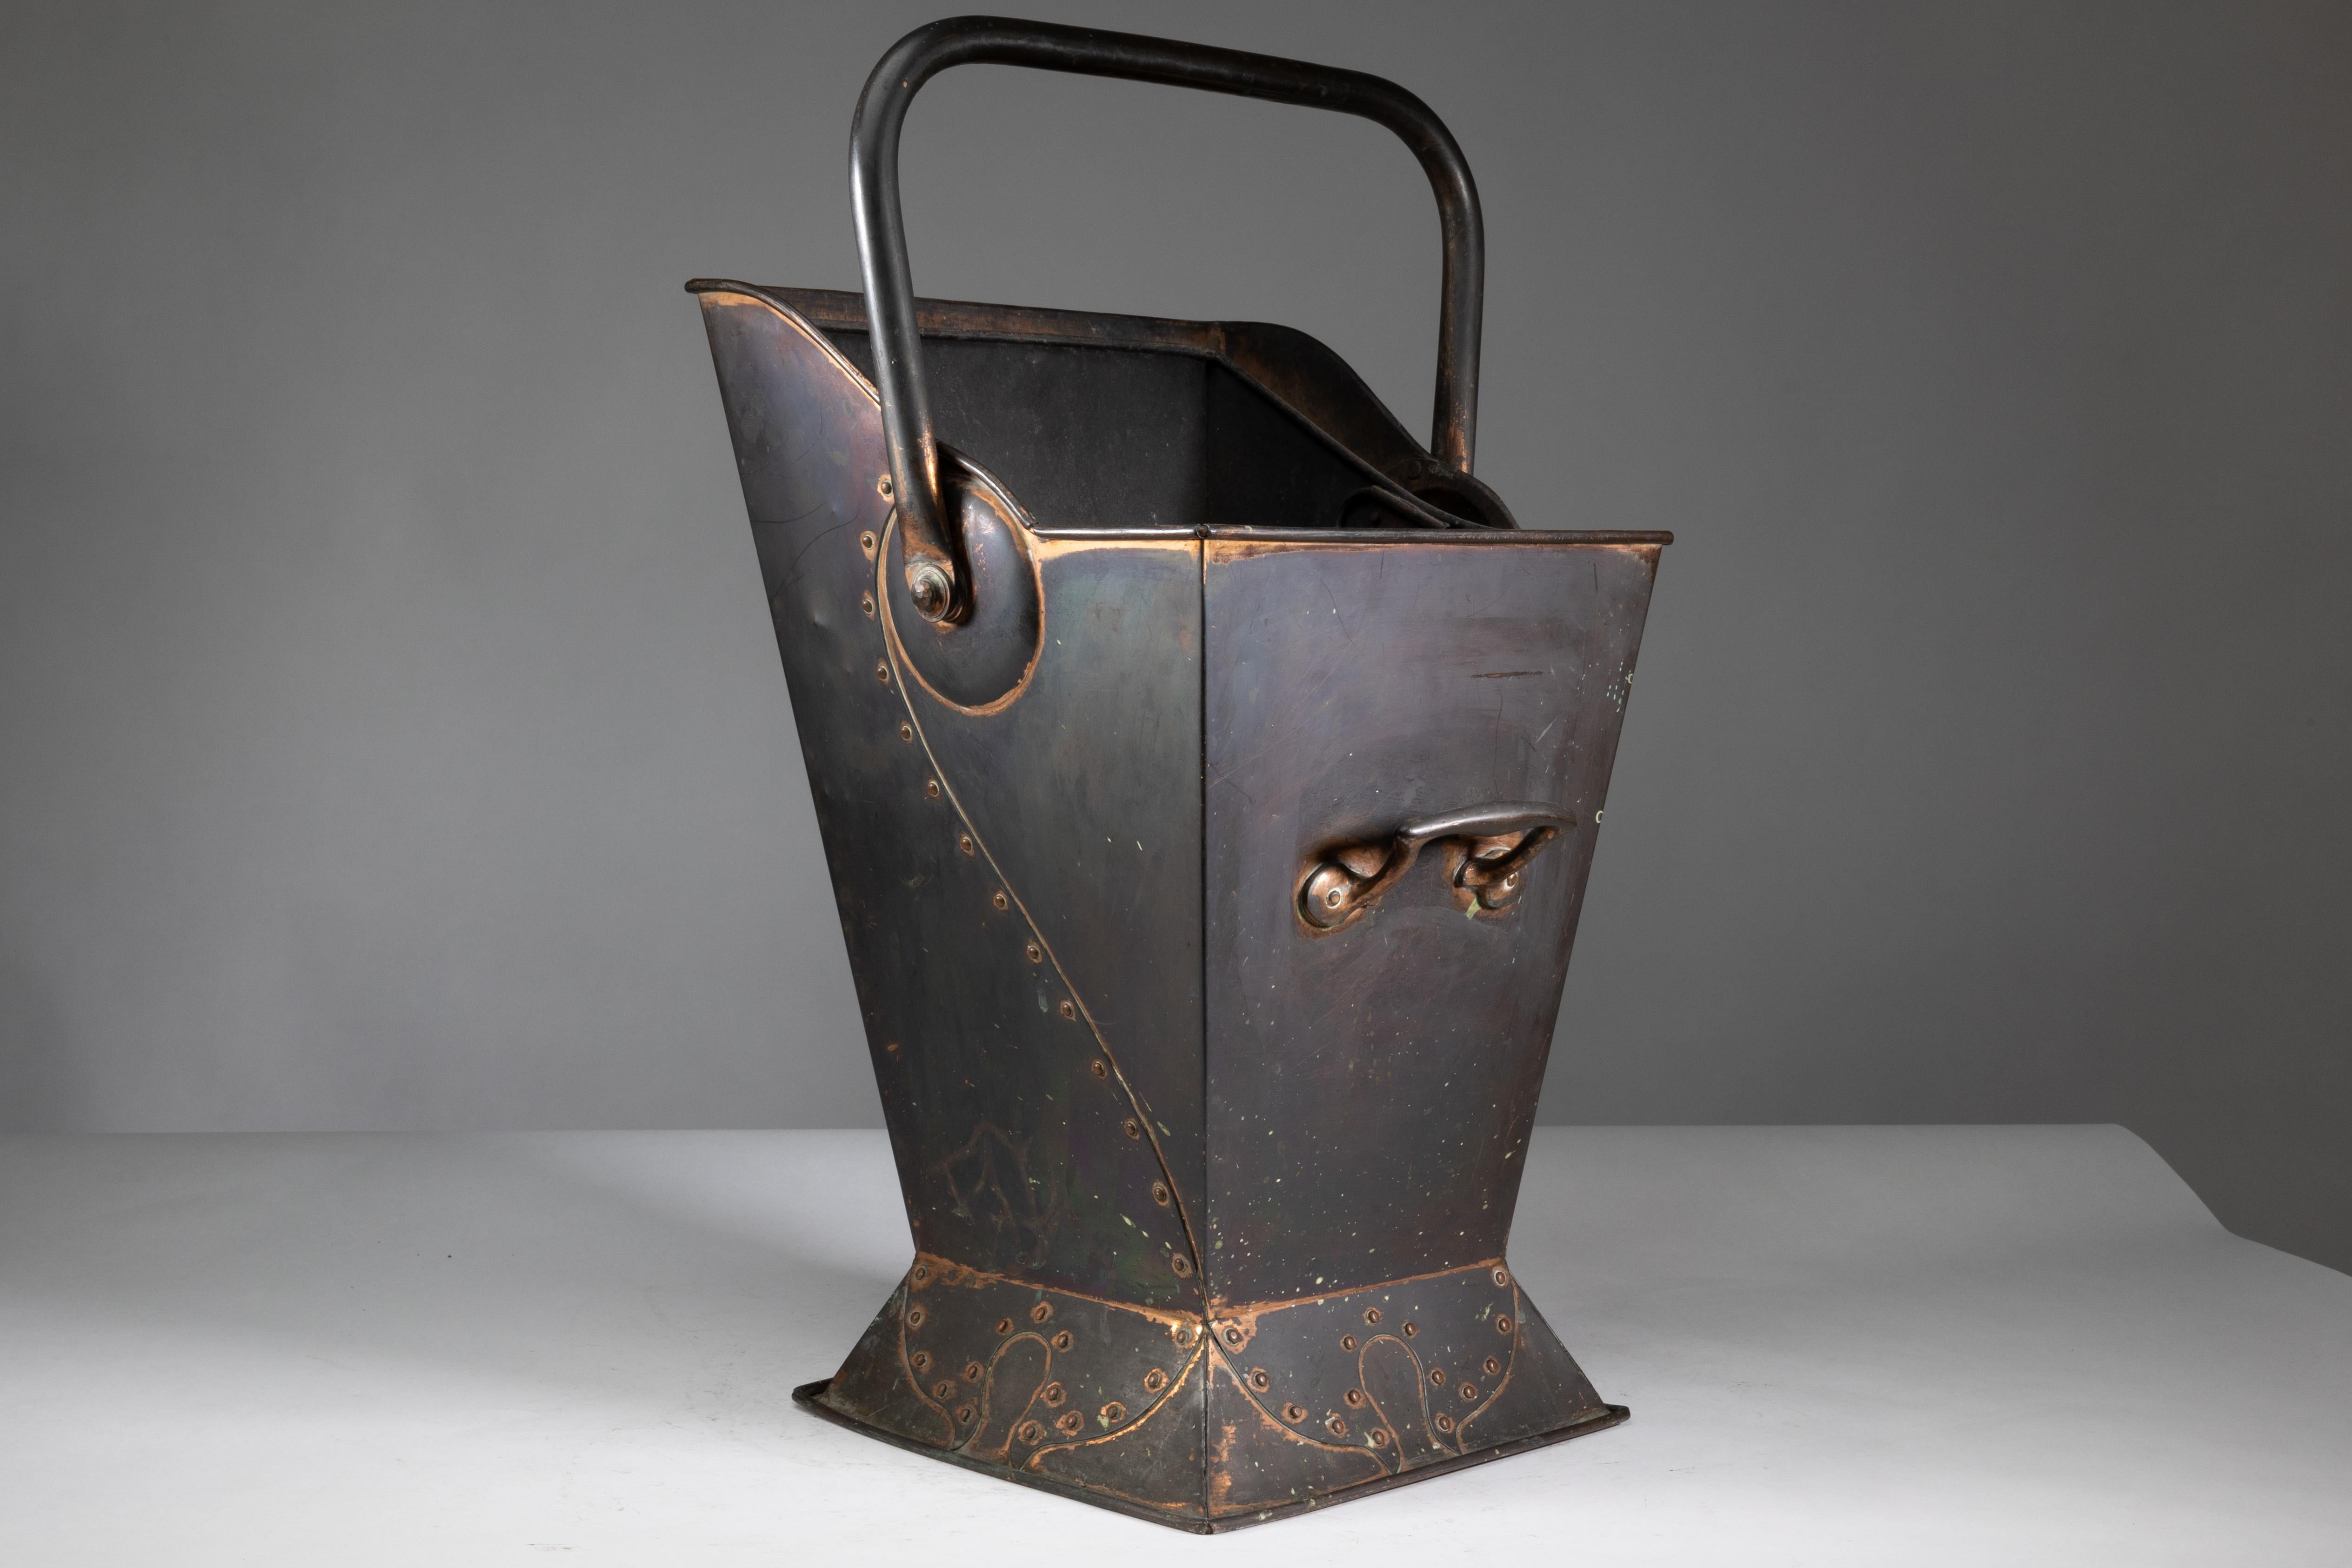 Arts and Crafts Robert Hilton. An Arts & Crafts copper coal bucket with a single flower in seed. For Sale